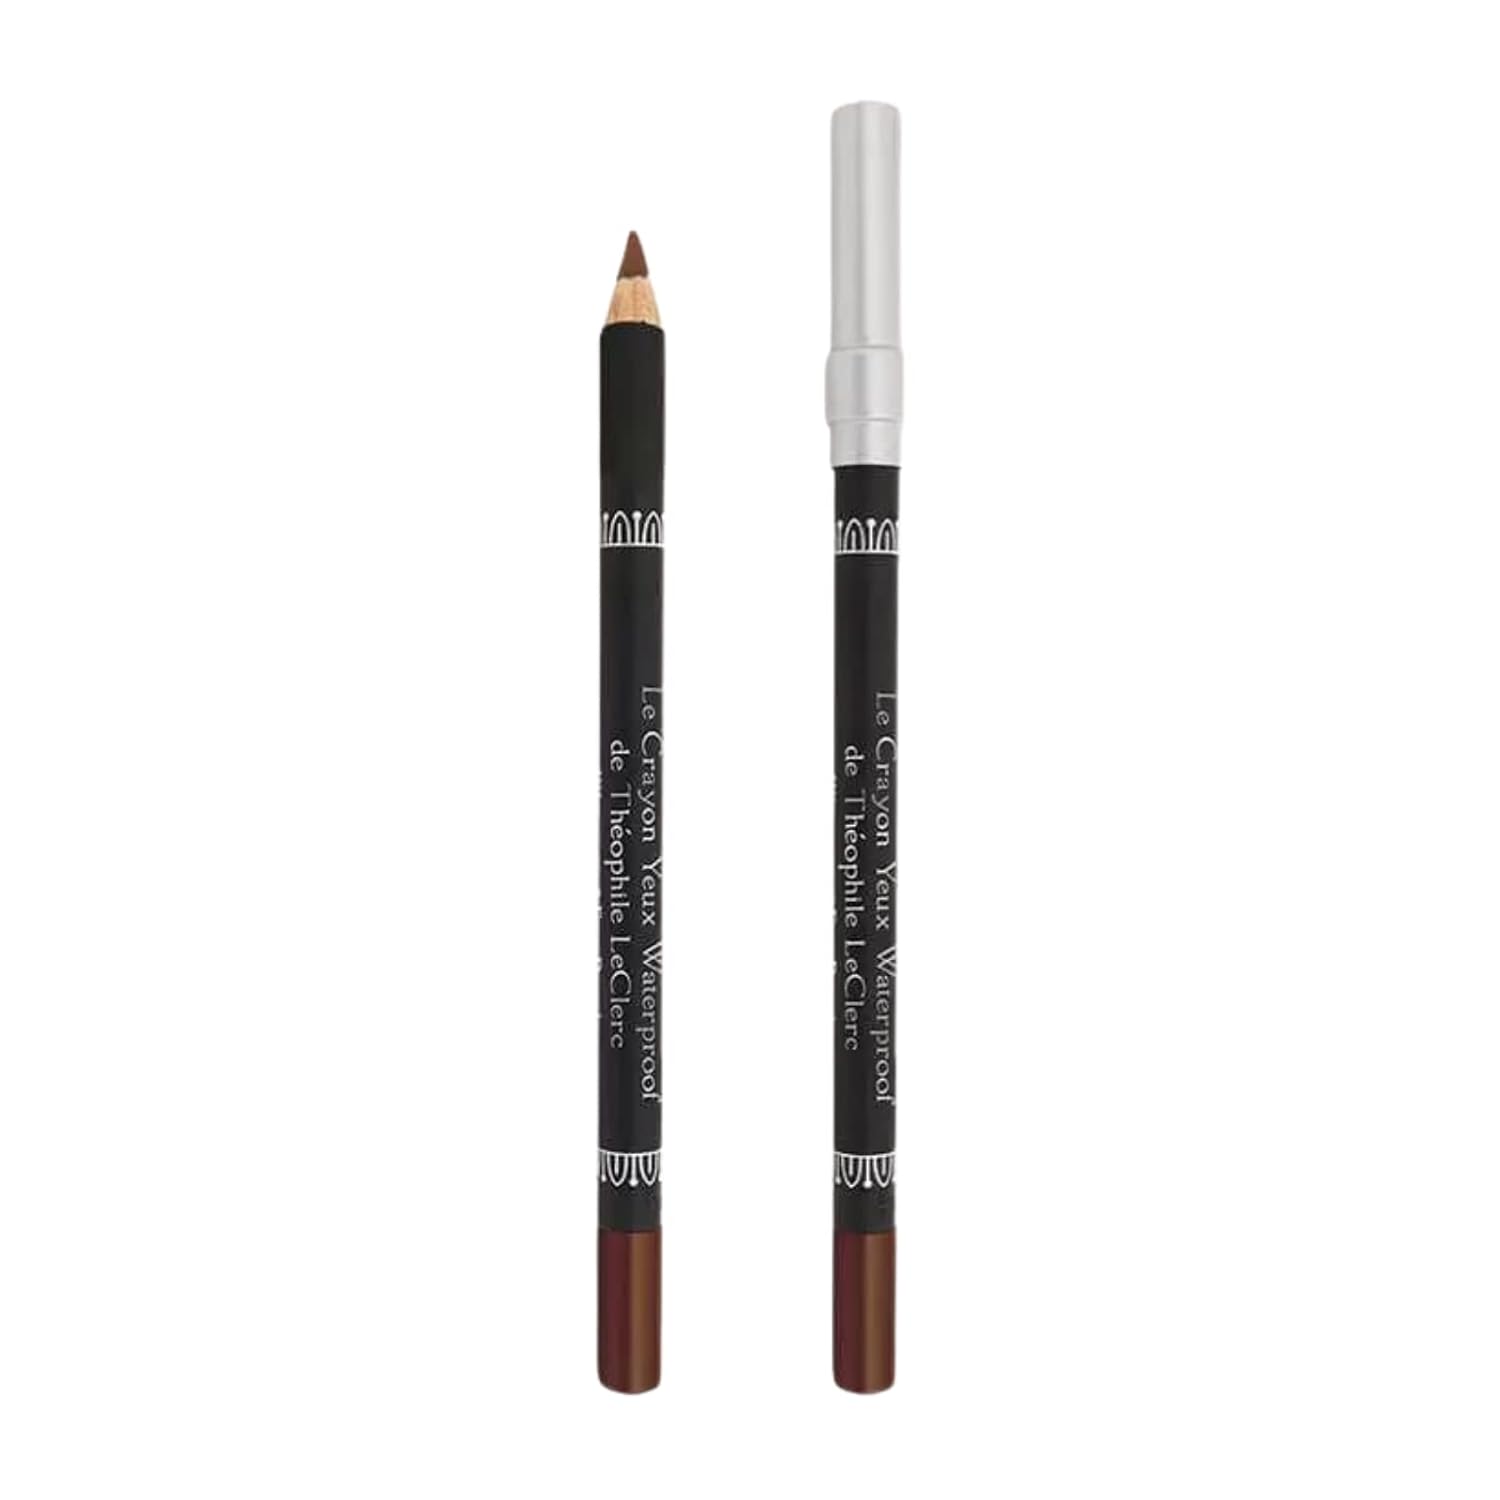 T. LeClerc Waterproof Eye Pencil - Creamy Contour Eyeliner for Water Line & Lash Line Precision Sharp Tip Long Lasting & Defining Easy to Color Smudge Proof Smokey Eye Makeup (Brun Place Des Vosges)